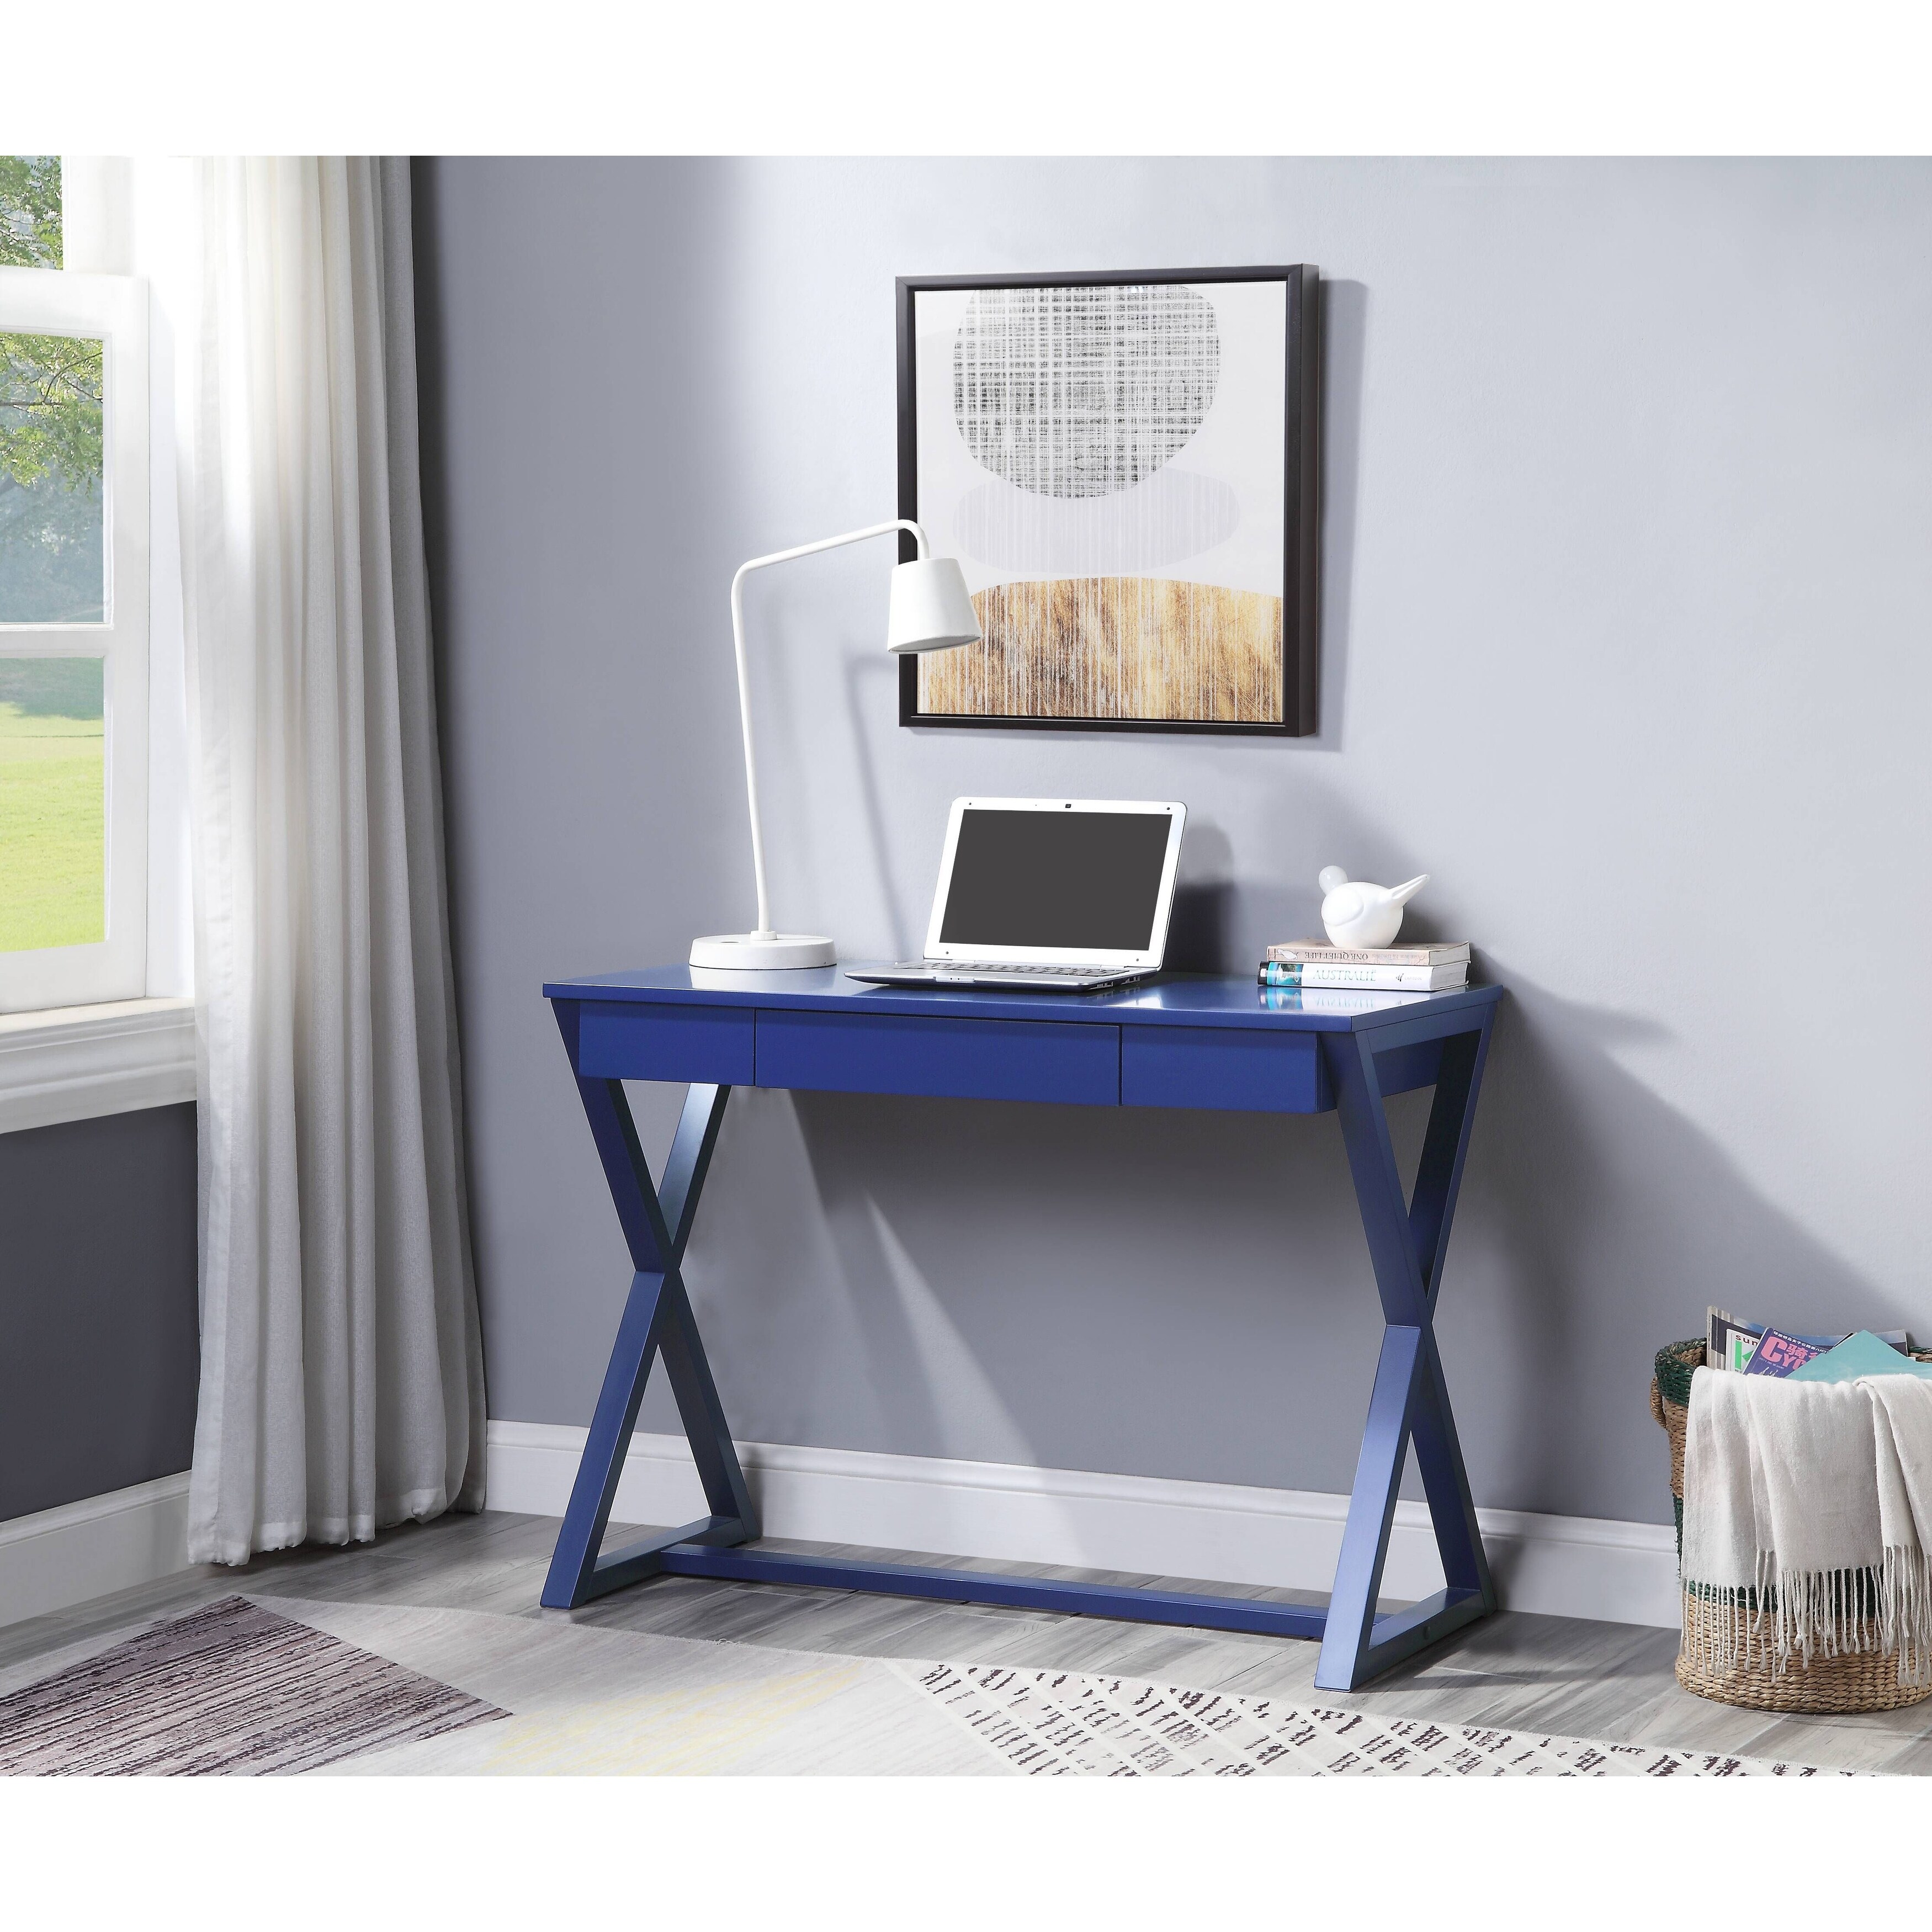 https://ak1.ostkcdn.com/images/products/is/images/direct/9bdc04208f59789dd25bdf31bbb6fa59e6398b23/Rectangular-Console-Table%2C-1-Storage-Drawers%2C-2-3-Expansion-Drawer-Glide-for-Office%2C-Hallway%2C-Living-Room.jpg